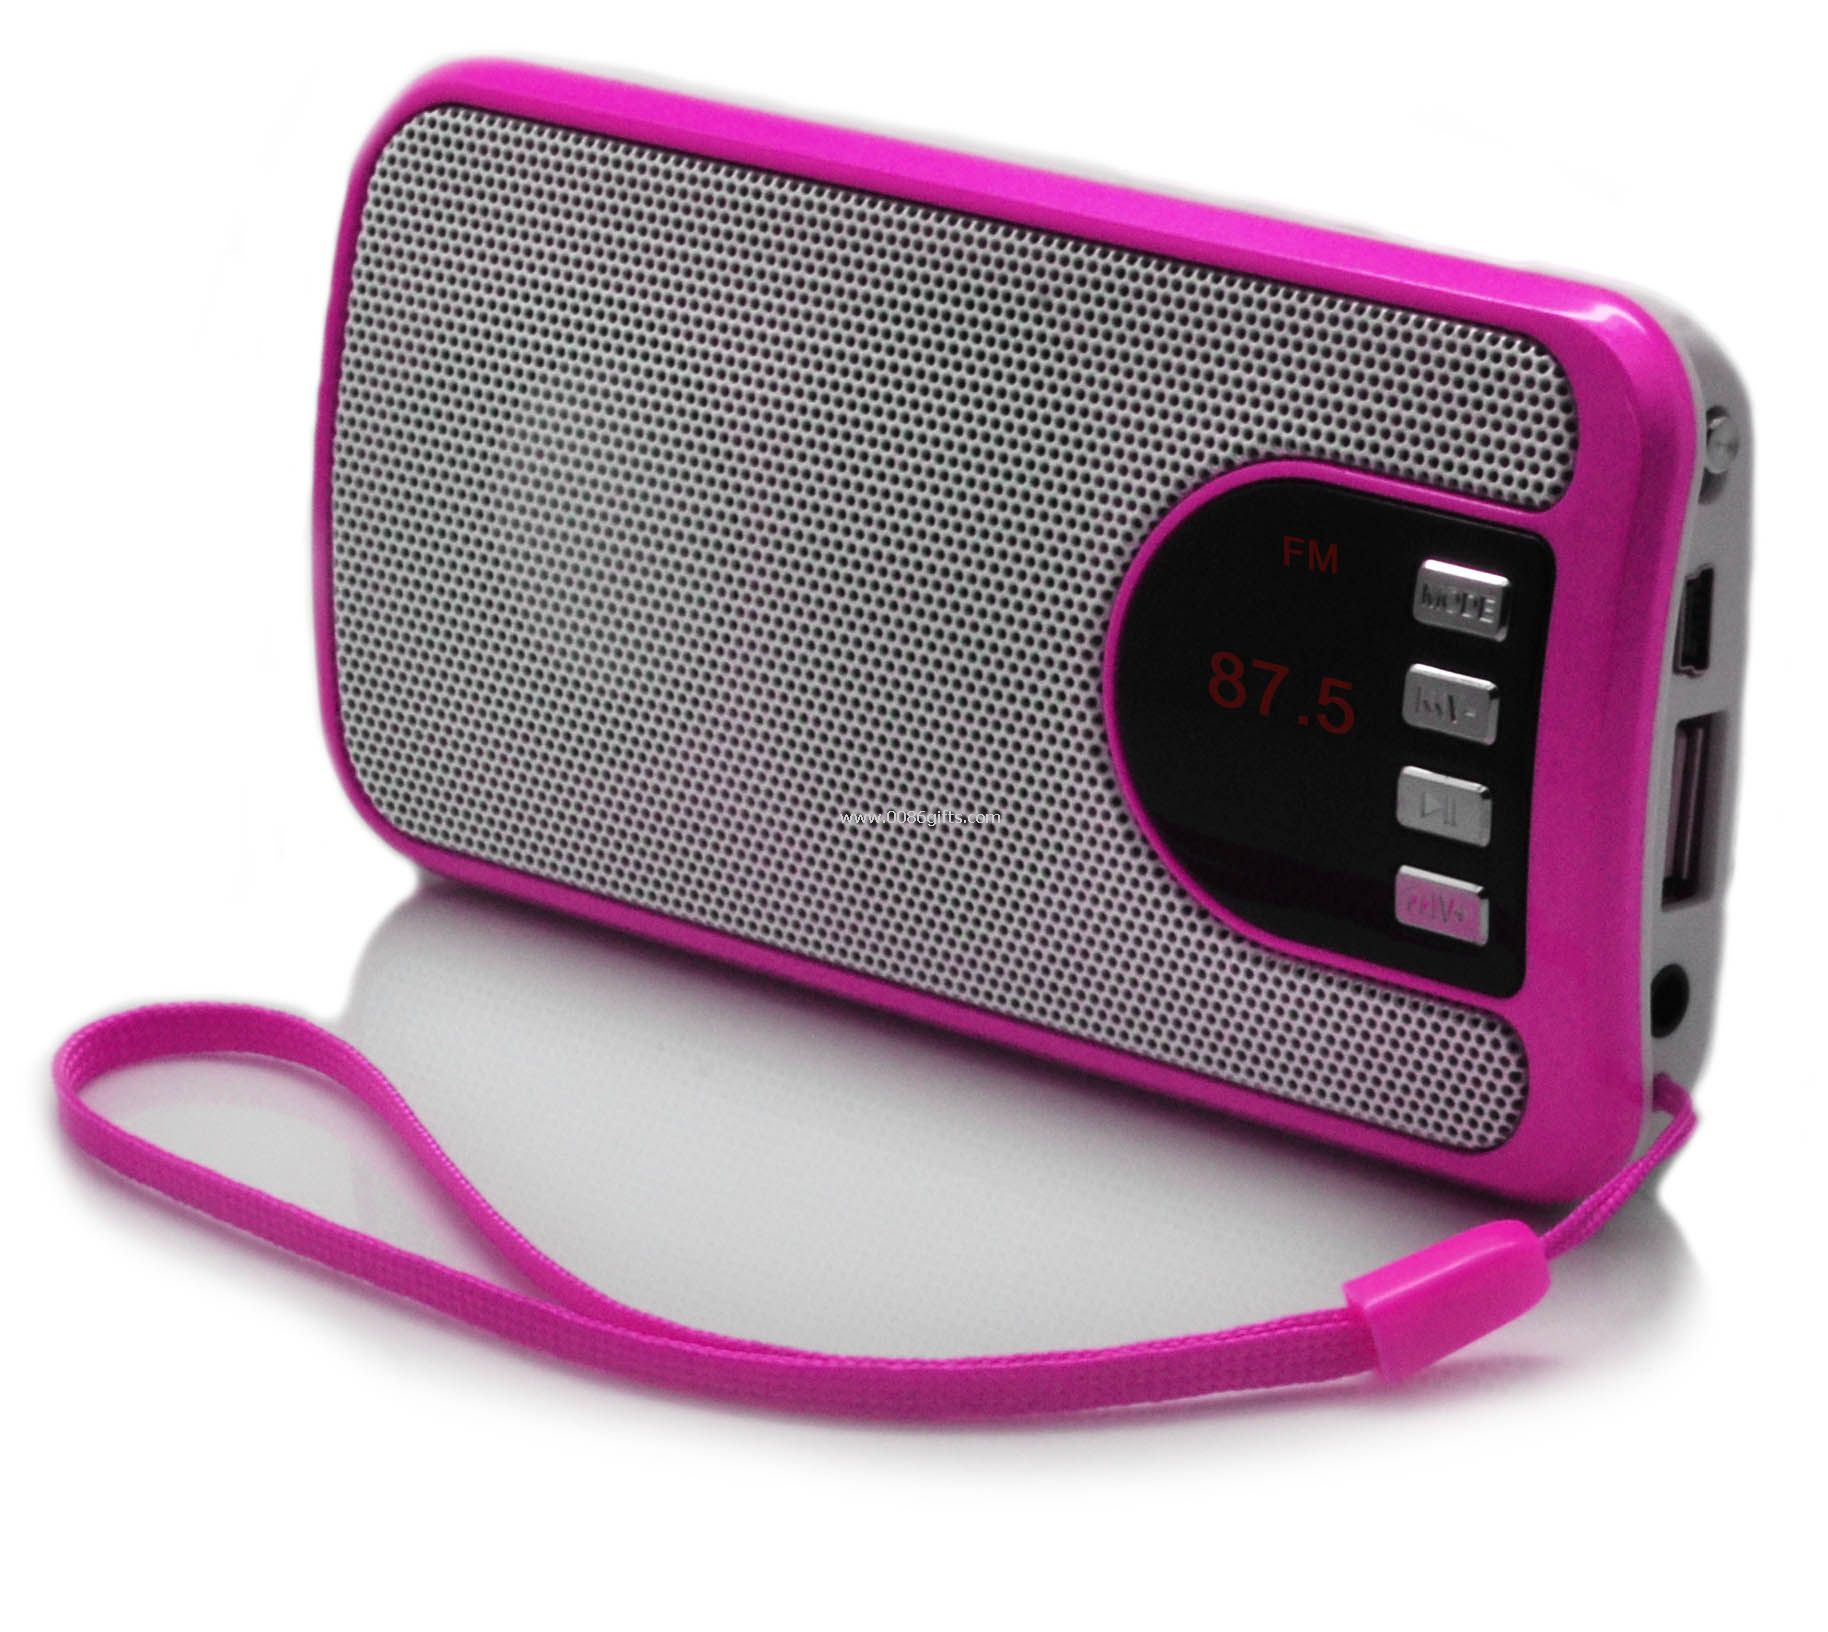 Play the MP3 from the TF card USB Disk Speaker